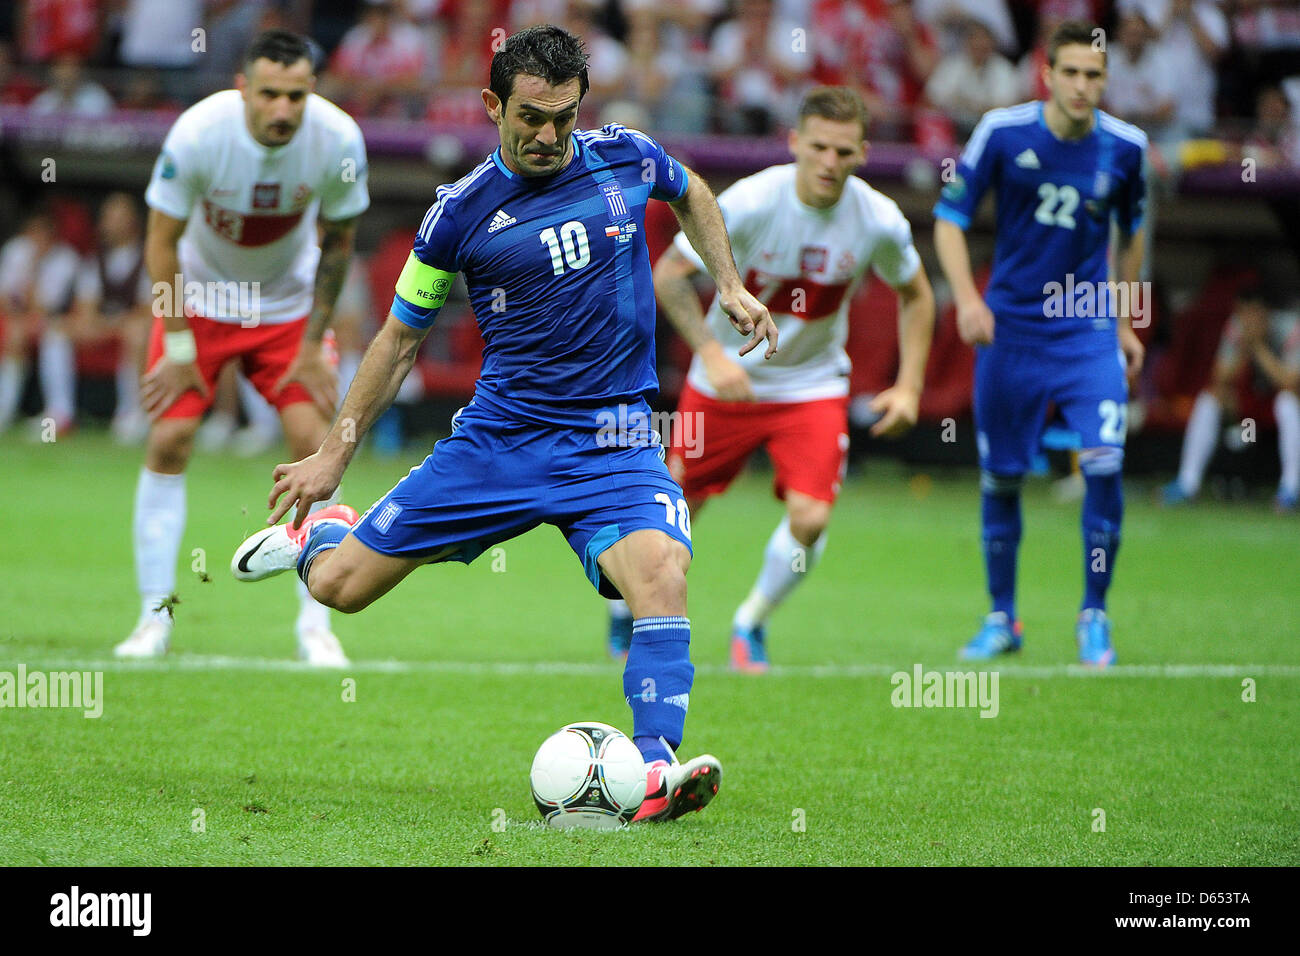 Greece's Giorgos Karagounis performs a penalty kick during the UEFA Euro 2012 match between Poland and Greece at the national stadium in Warsaw, Poland, 08 June 2012. Photo: Pressfocus / Revierfoto Stock Photo